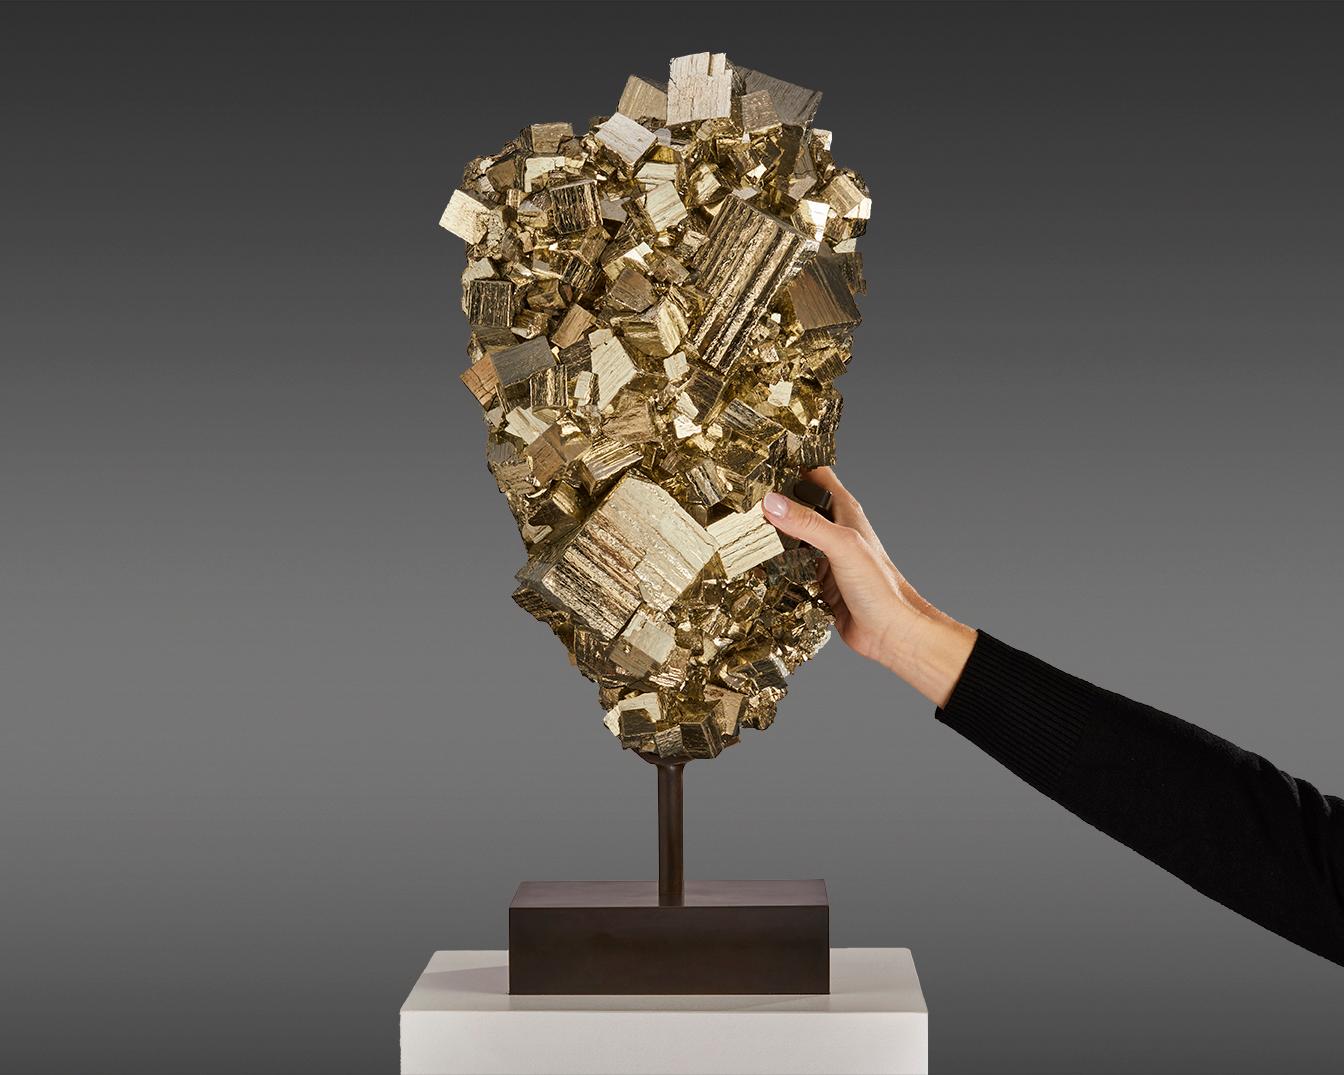 Impressive sculpture features a large cluster of Pyrite,
masterfully extracted from the depths of Peru. Renowned
for its metallic luster and golden hue, Pyrite—often called
“Fool’s Gold”—creates a captivating visual symphony of cubes
varying in